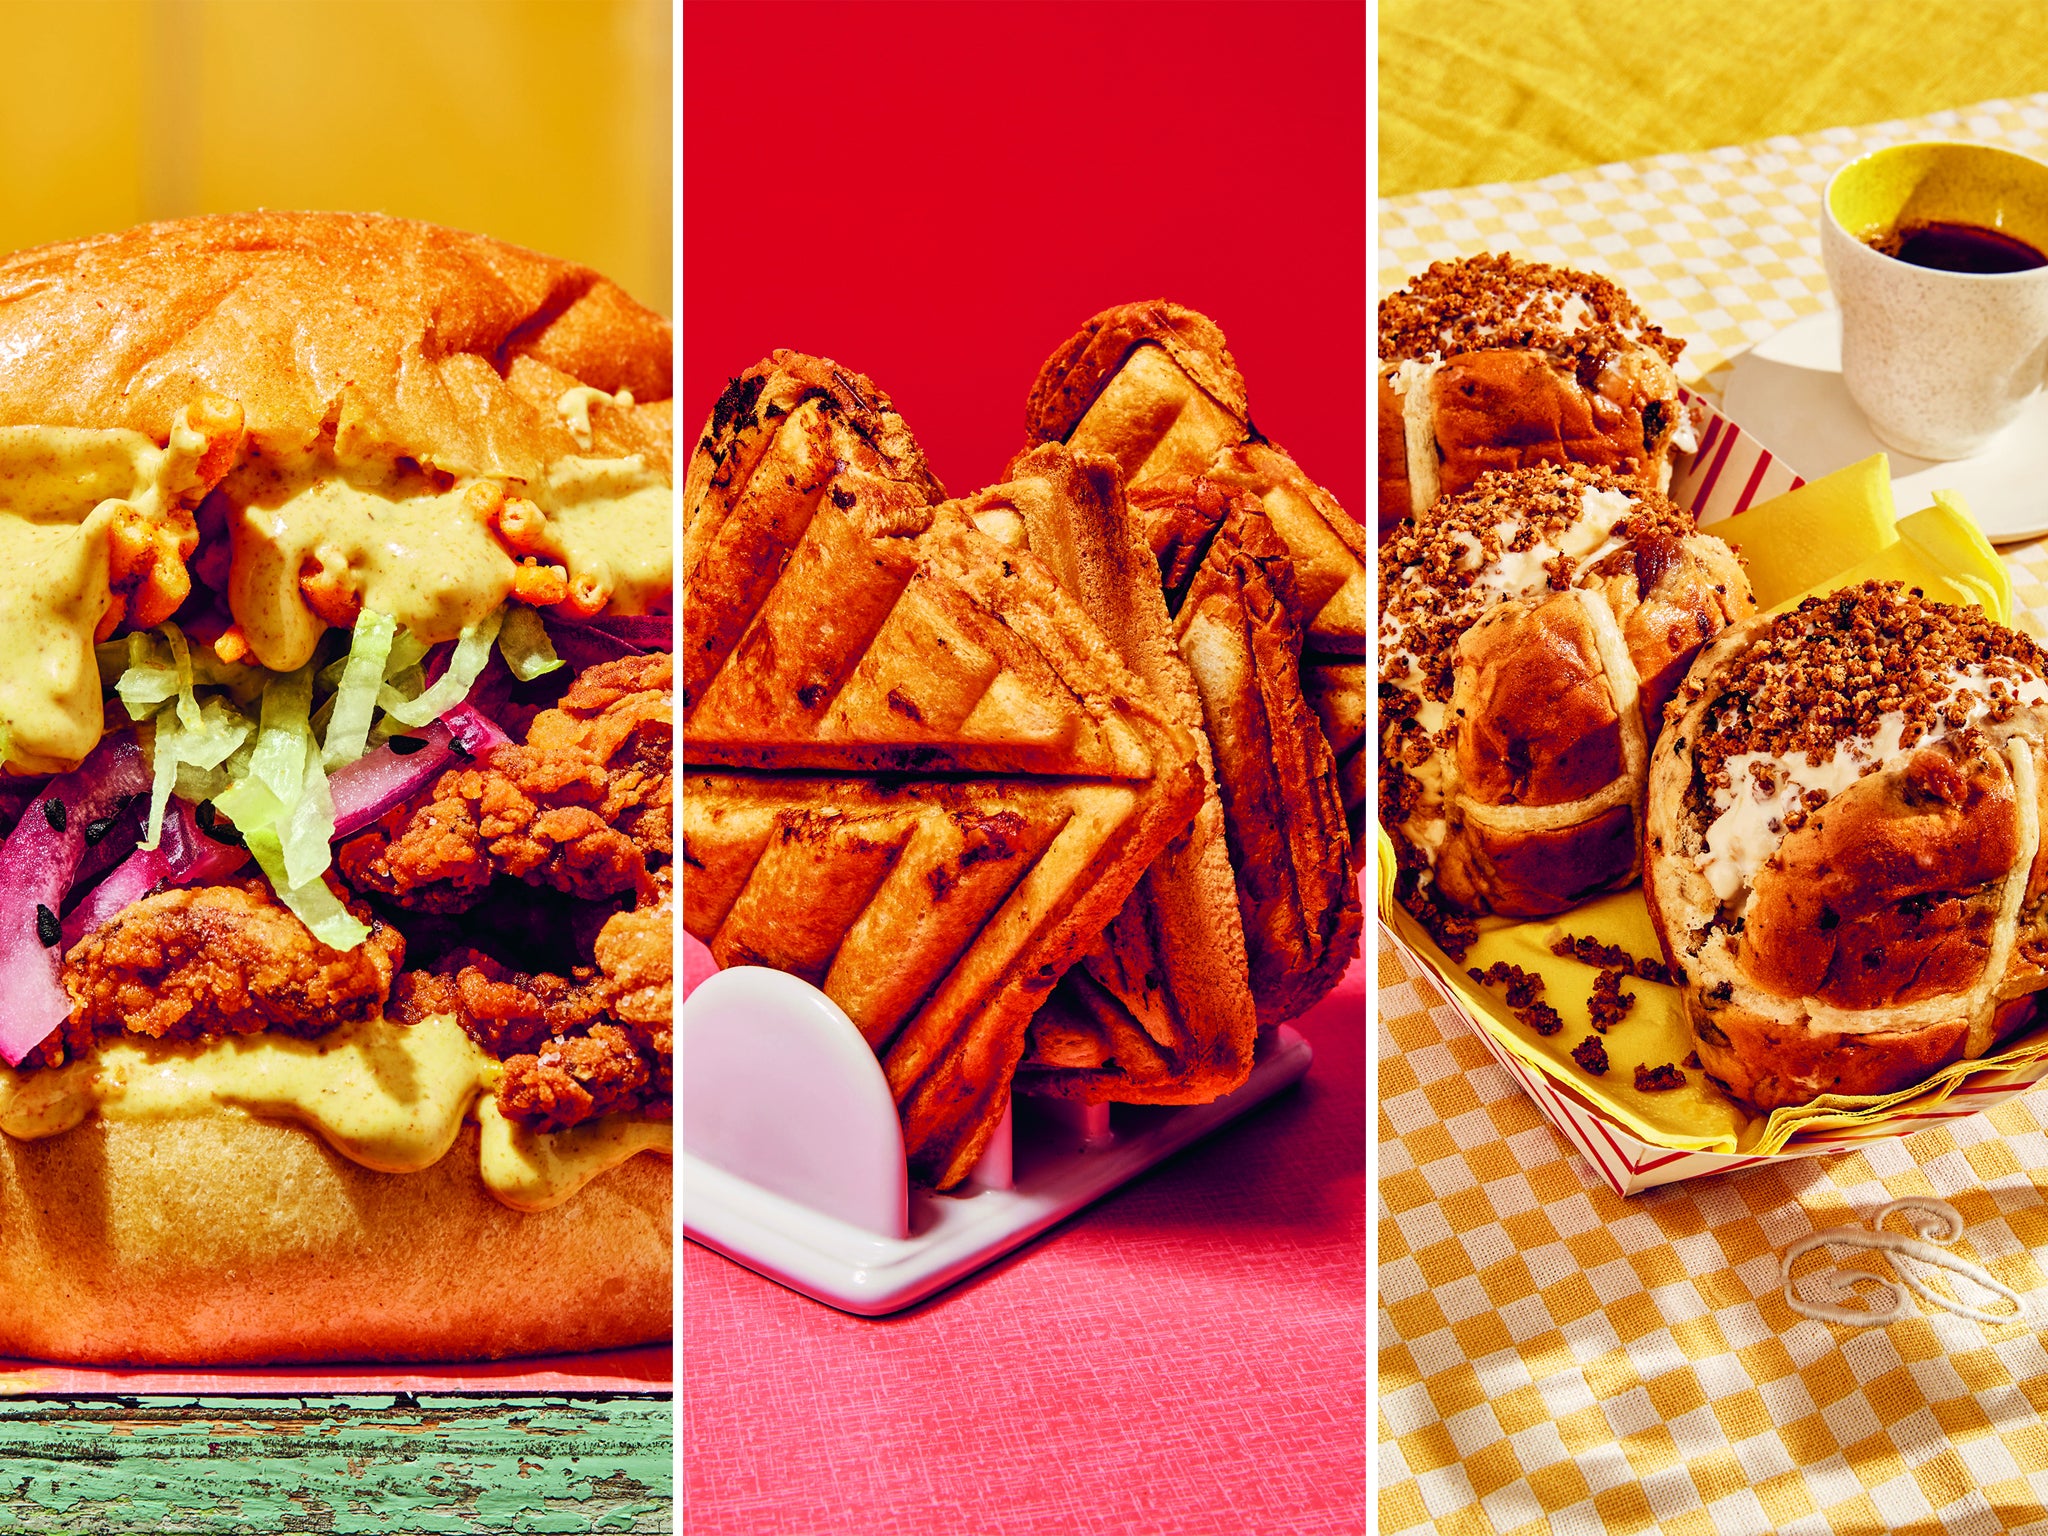 From Coronation fried chicken to hot cross buns with ice cream, take your sandwich game up a notch